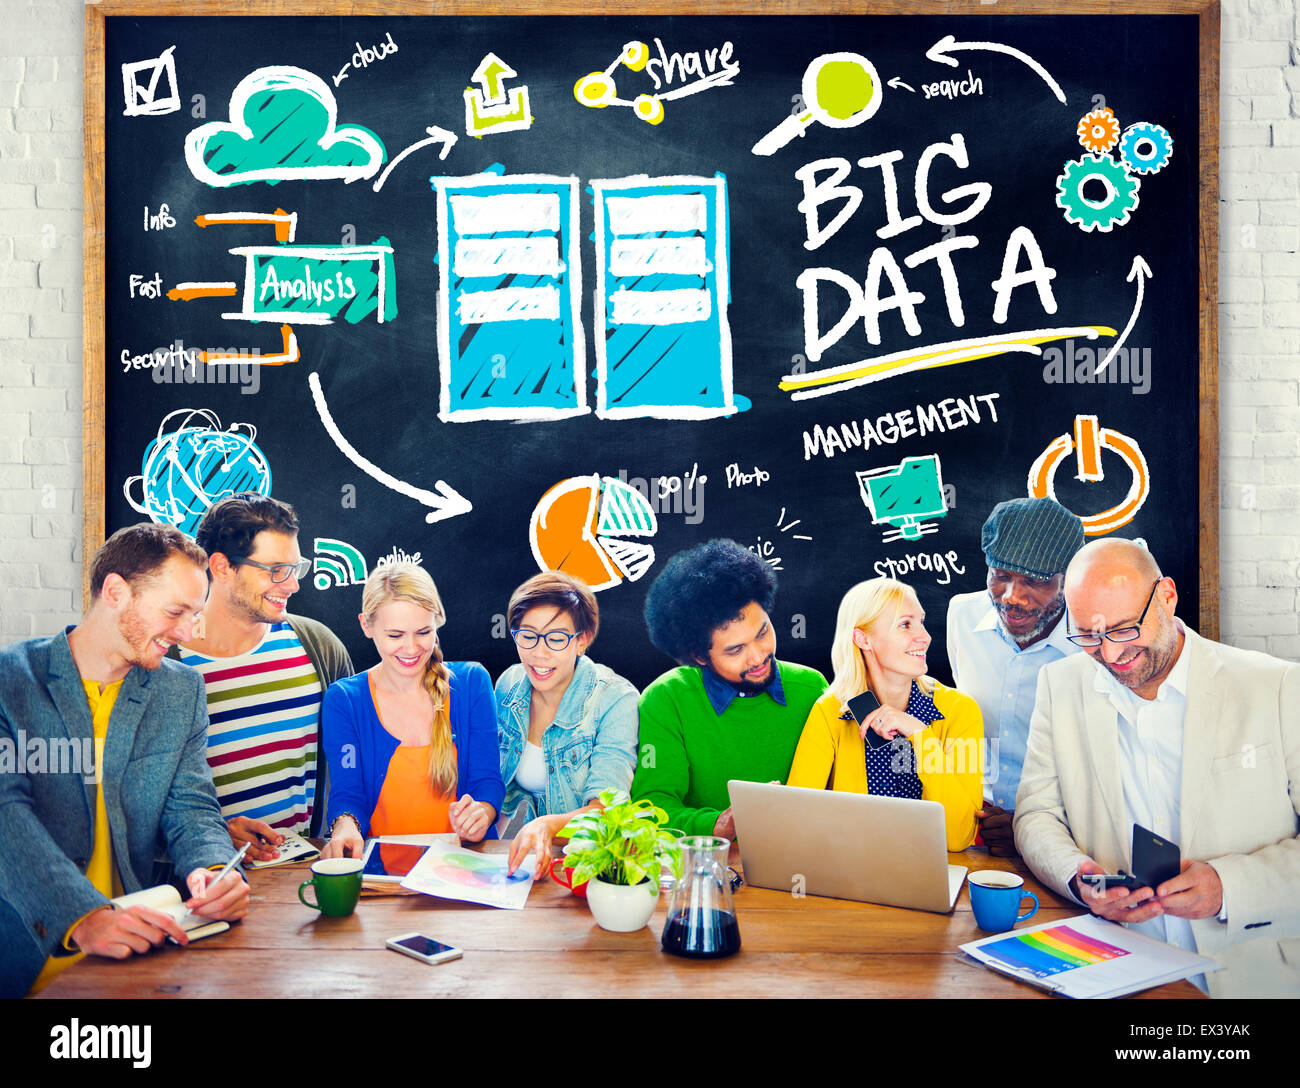 Diversity People Big Data Learning Teamwork Discussion Concept Stock Photo